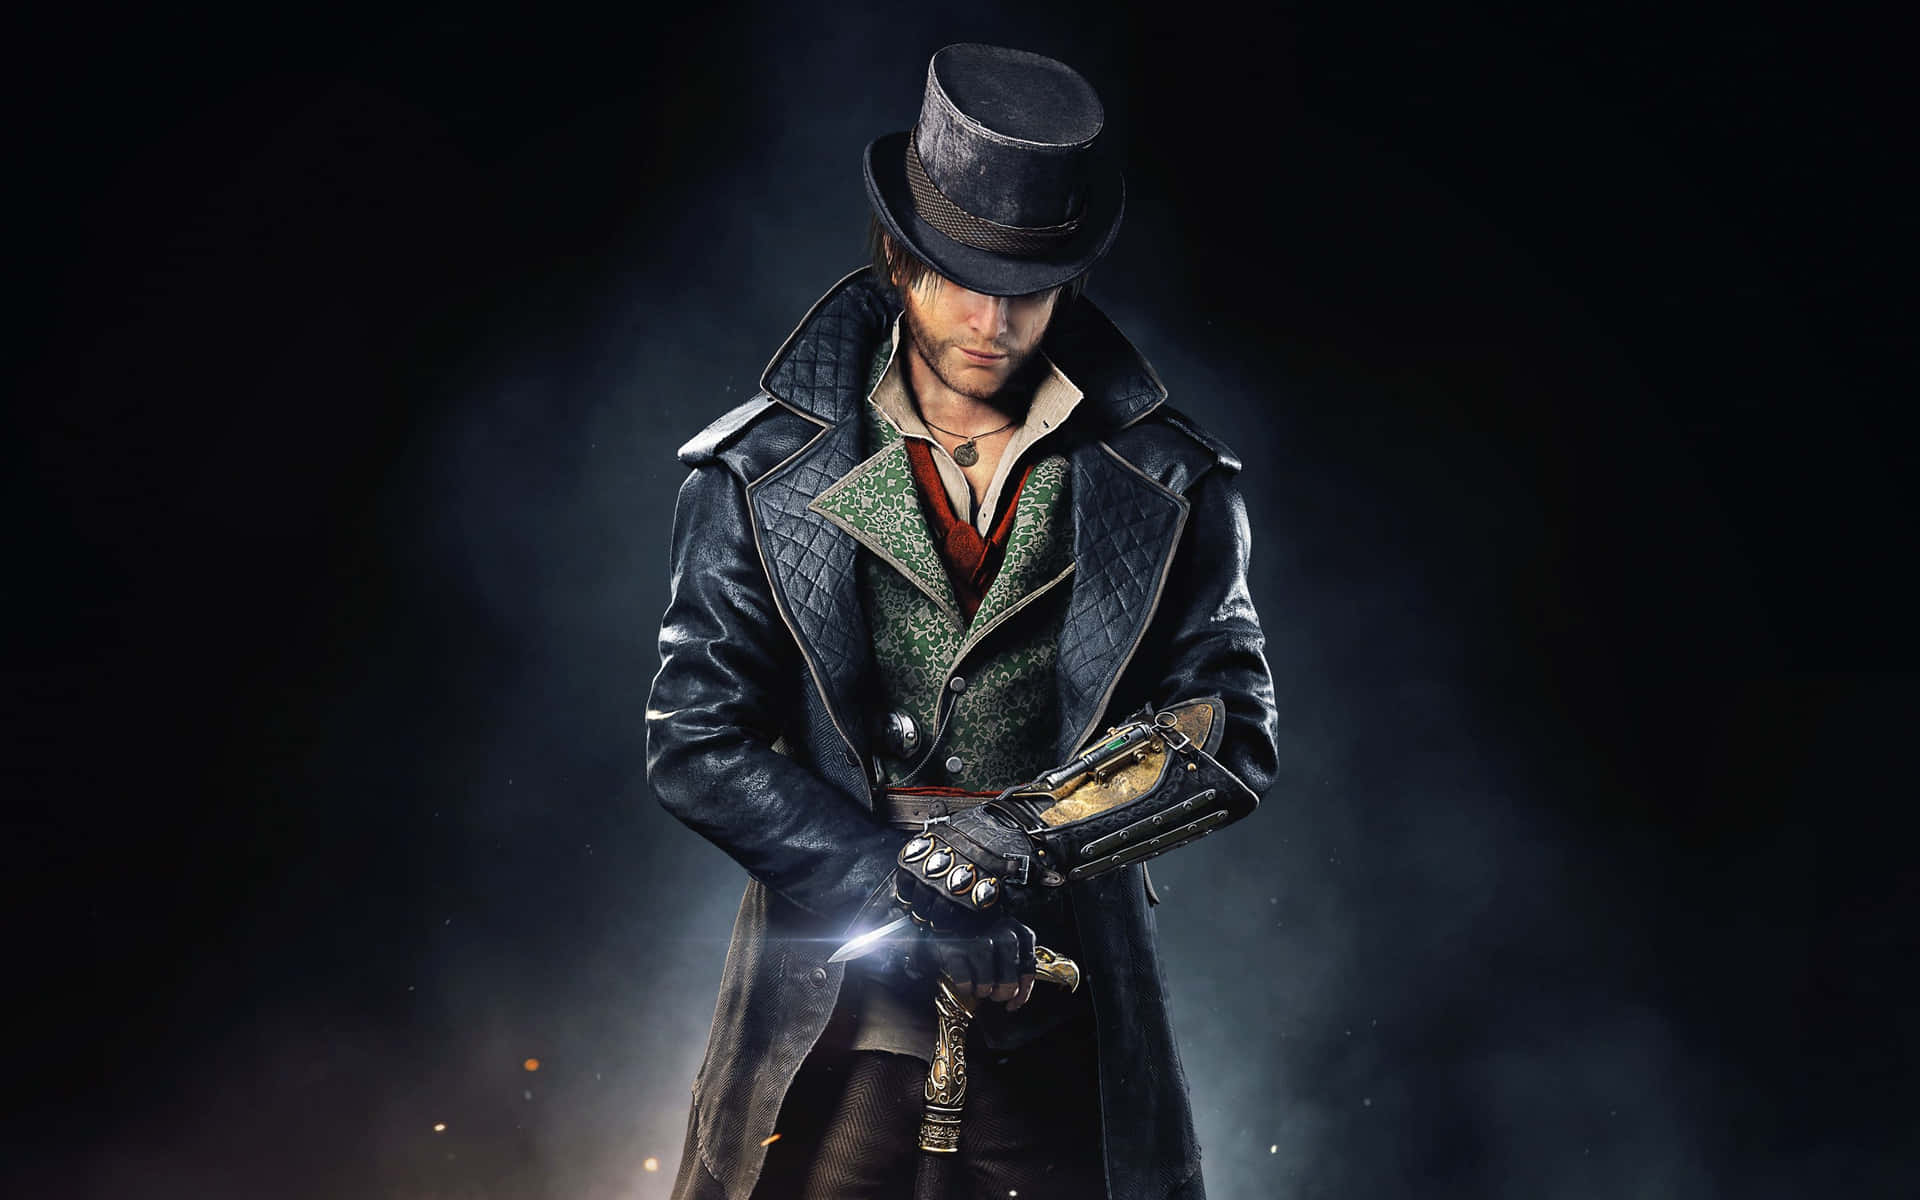 Assassin's Creed Syndicate - Evie and Jacob Frye in action Wallpaper